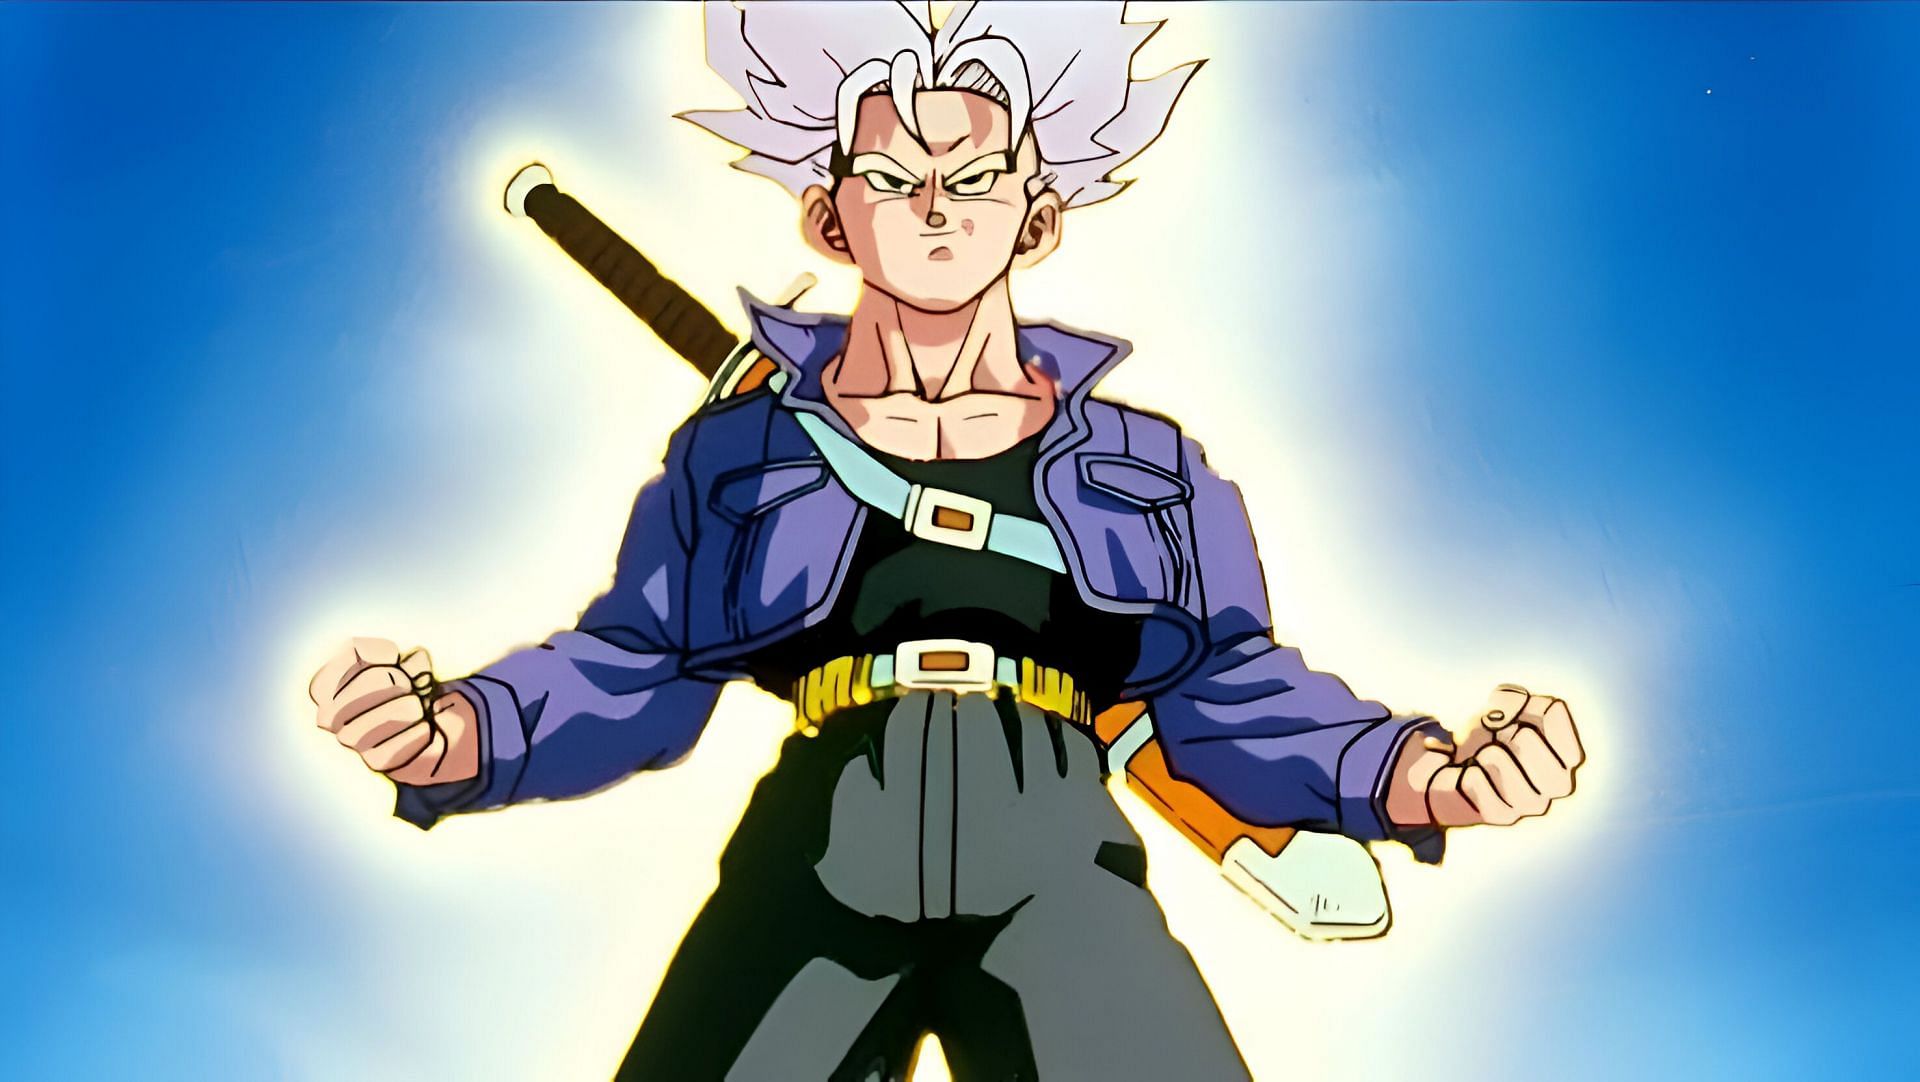 Trunks as seen in the anime (Image via Toei Animation)